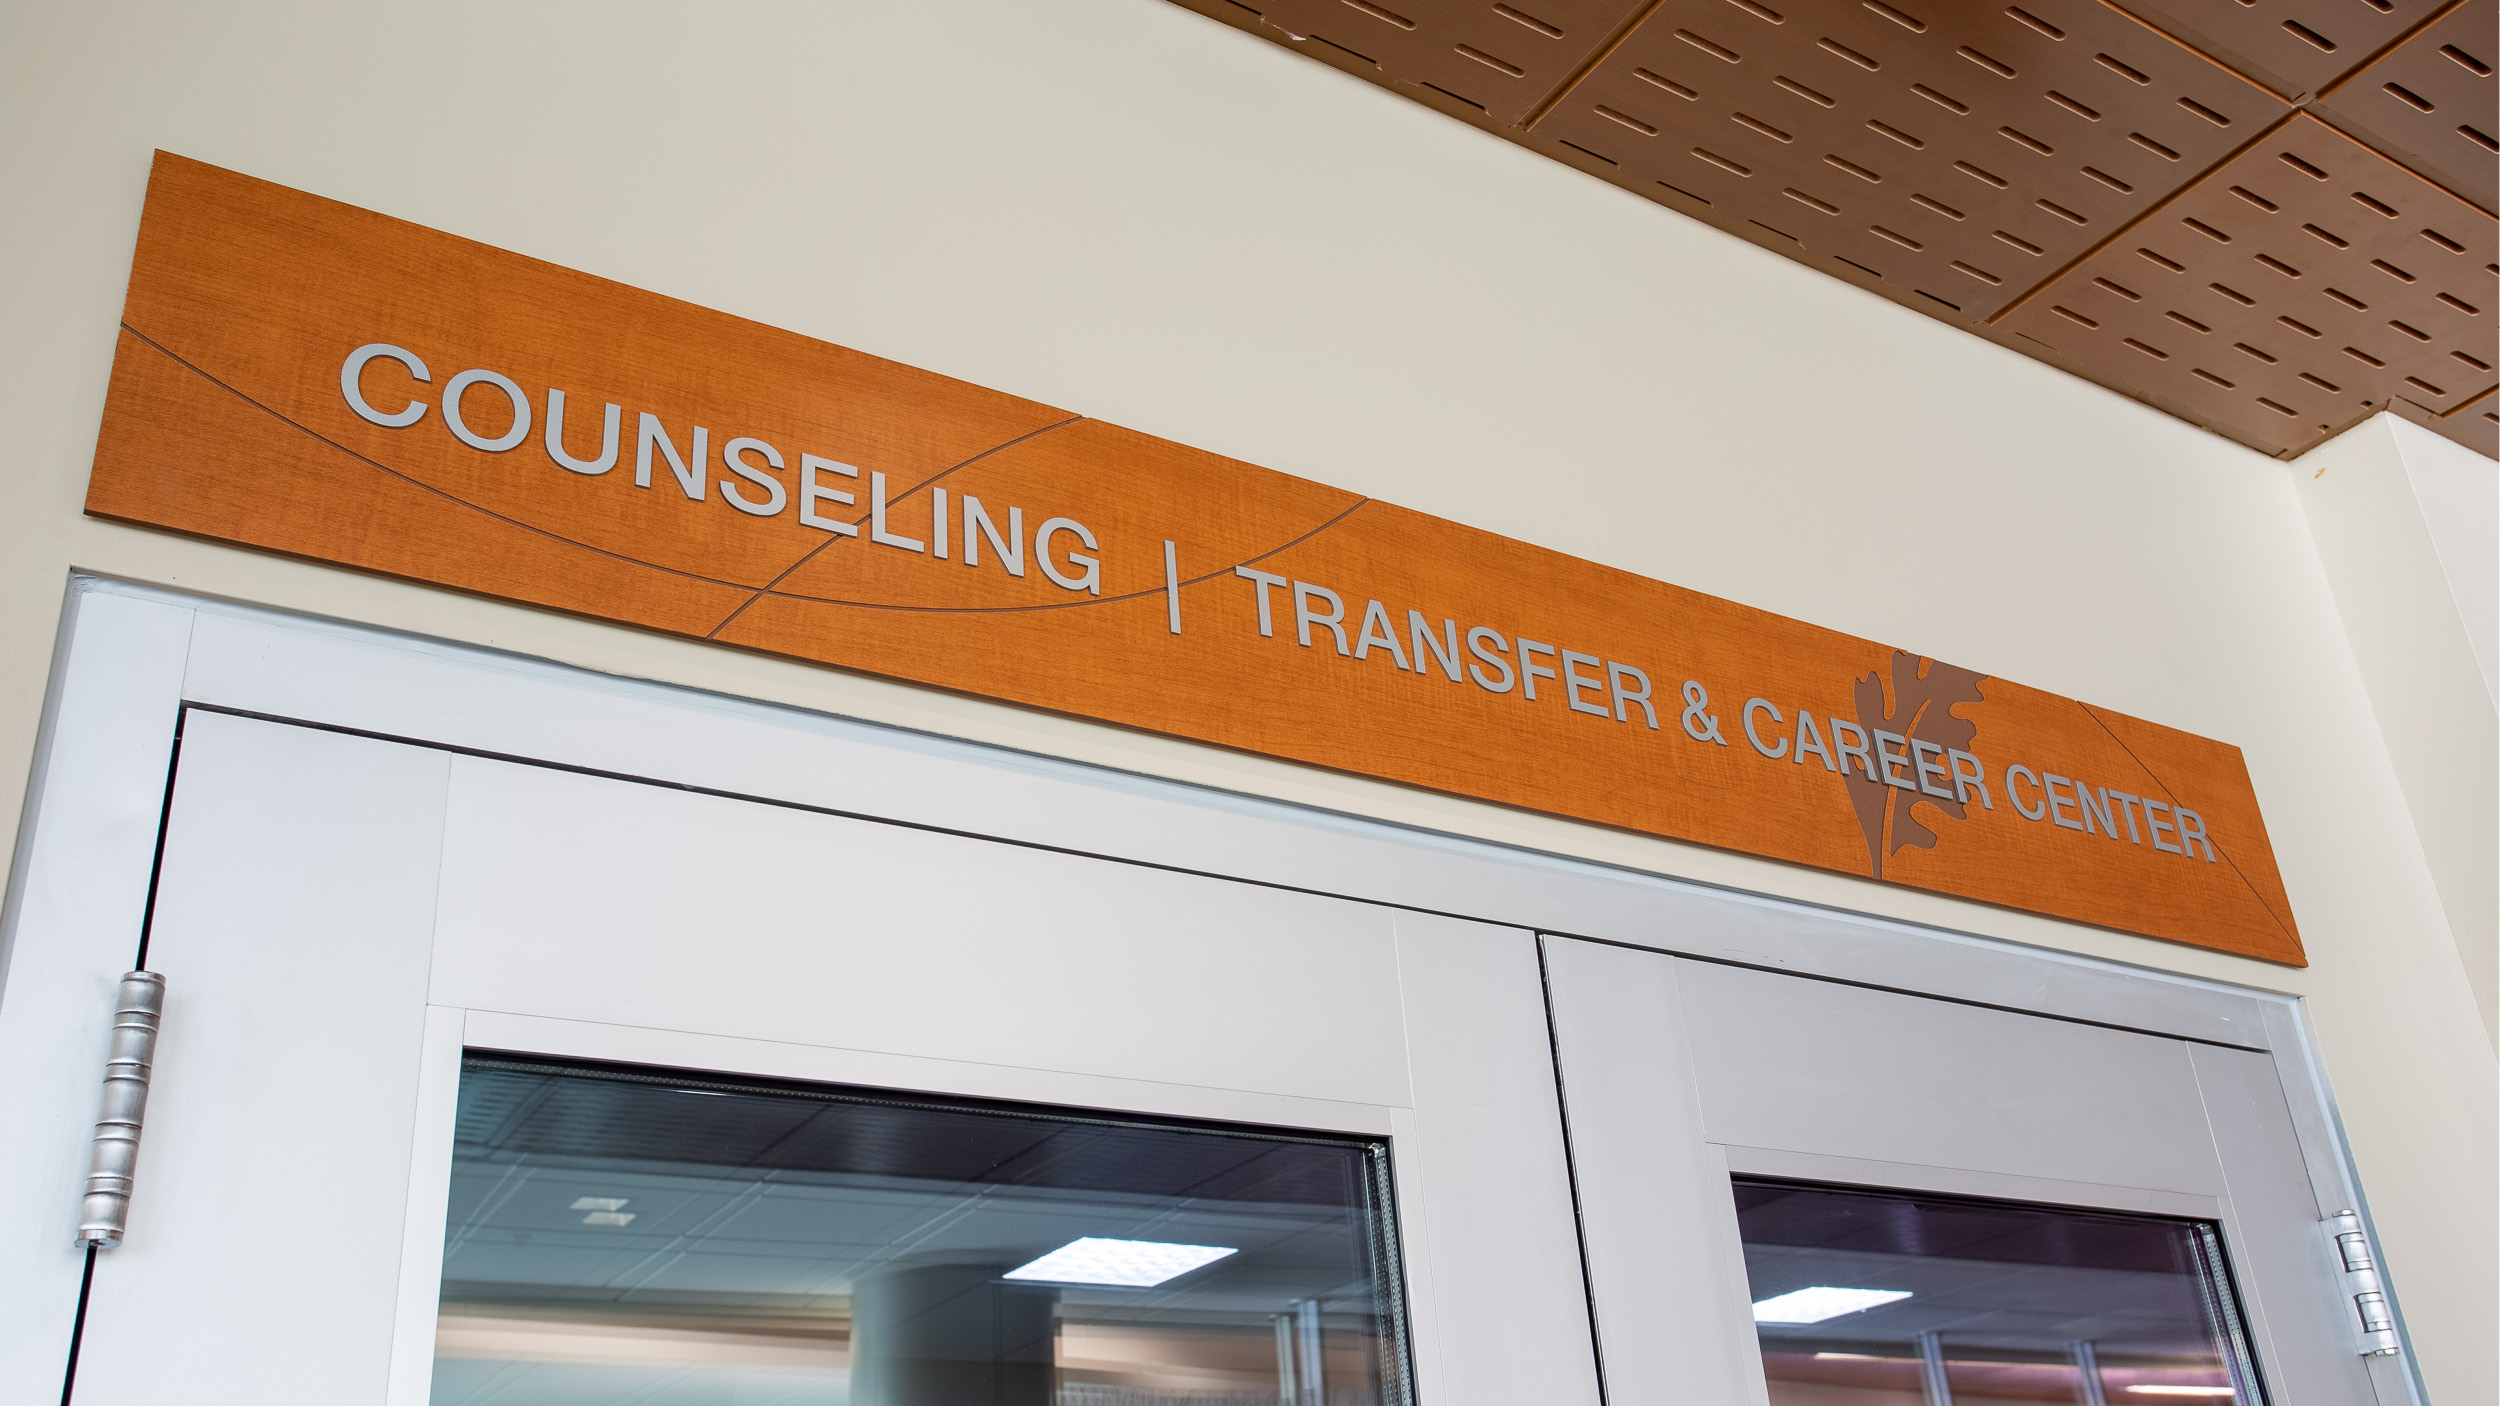 West Valley College Counseling, Transfer & Career Center Signage Detail Shot